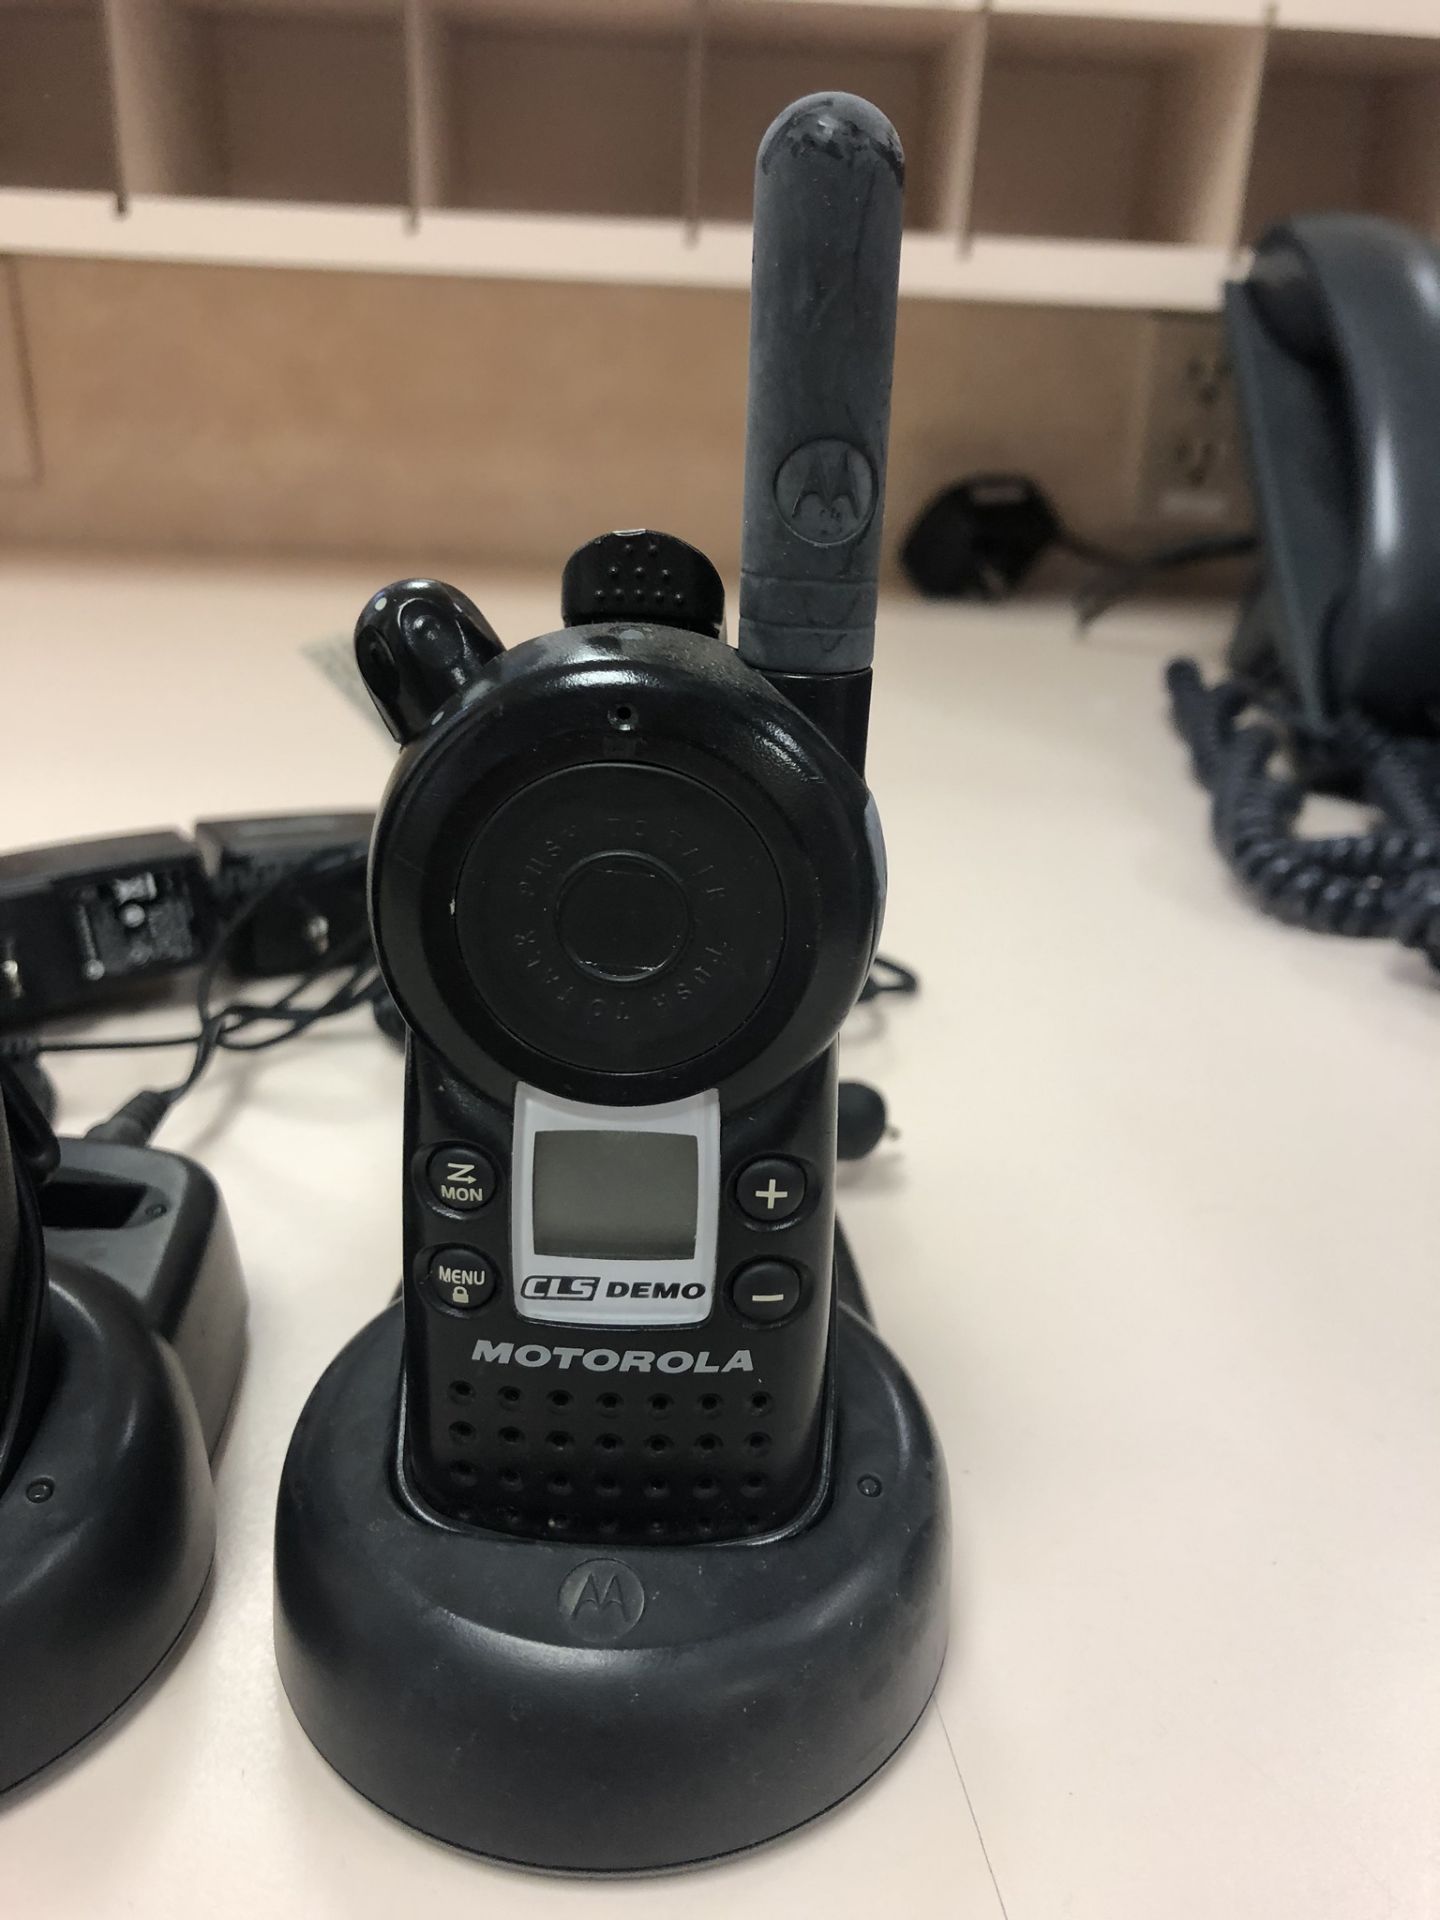 LOT OF (2) MOTOROLA, CLS, TWO-WAY RADIO WITH CHARGING STATION - Image 2 of 3